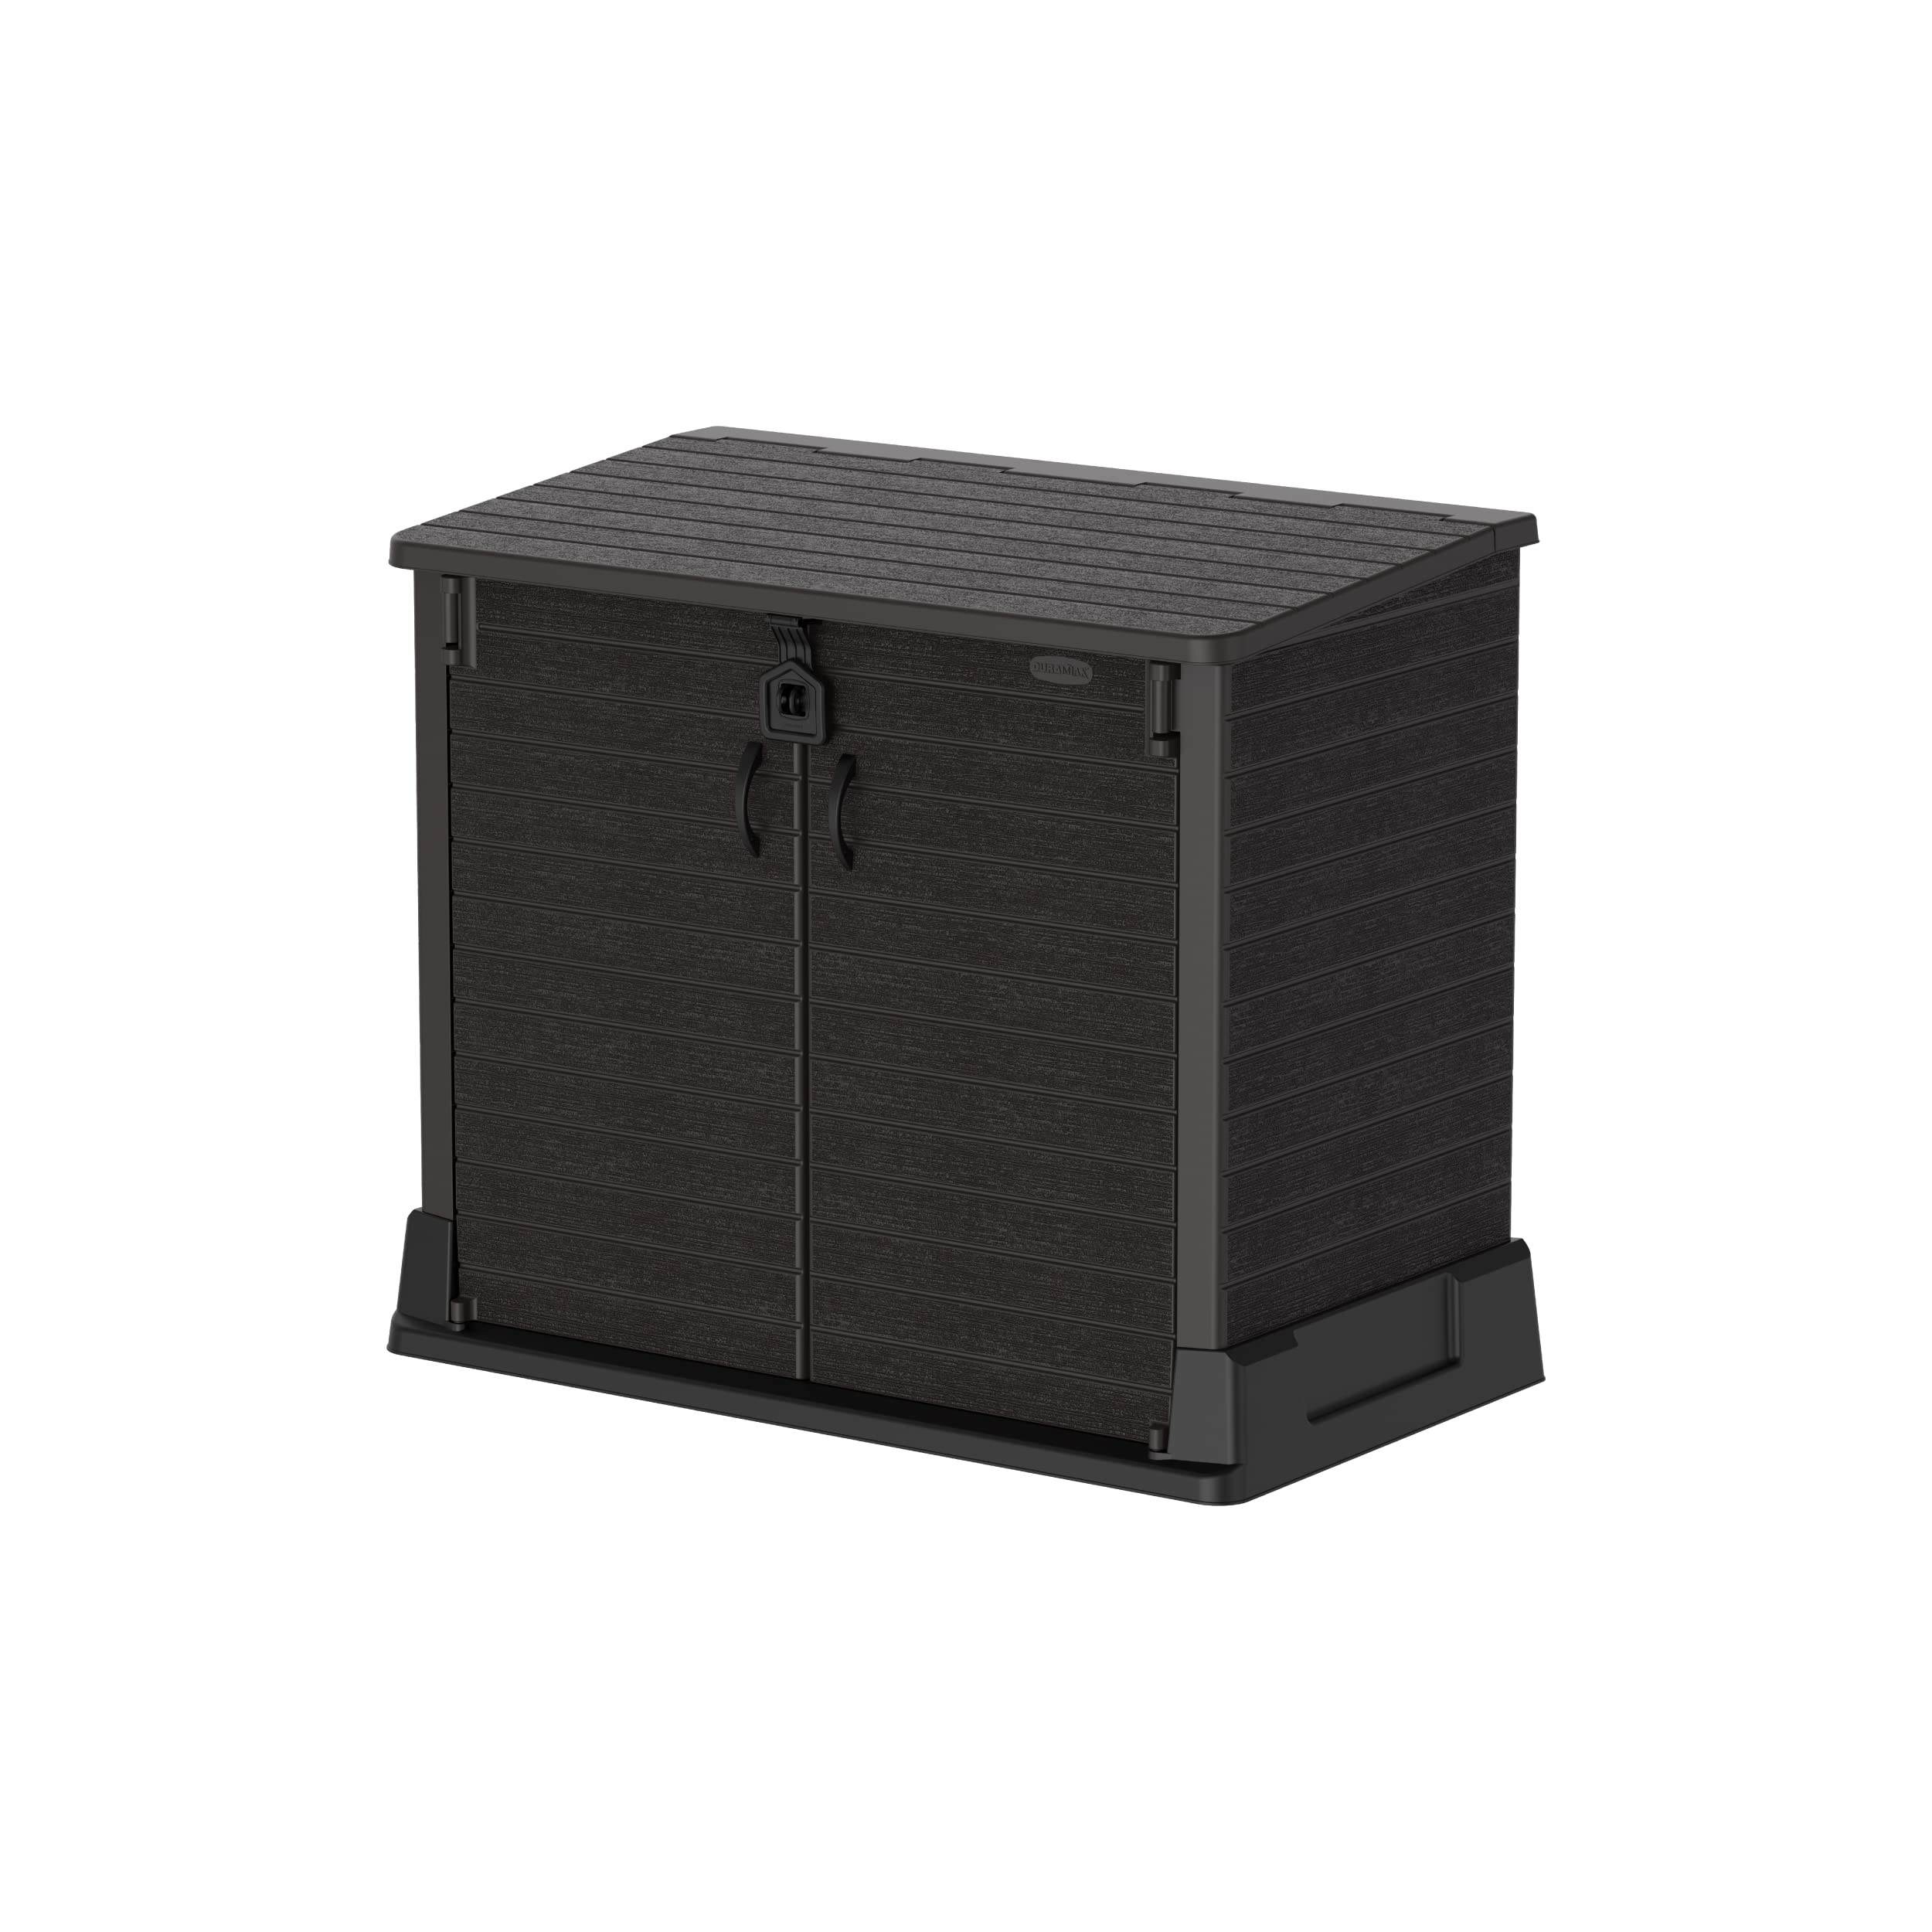 Duramax cedargrain StoreAway 850L Plastic garden Storage Shed - Outdoor Storage Bike Shed - Durable & Strong construction- Ideal